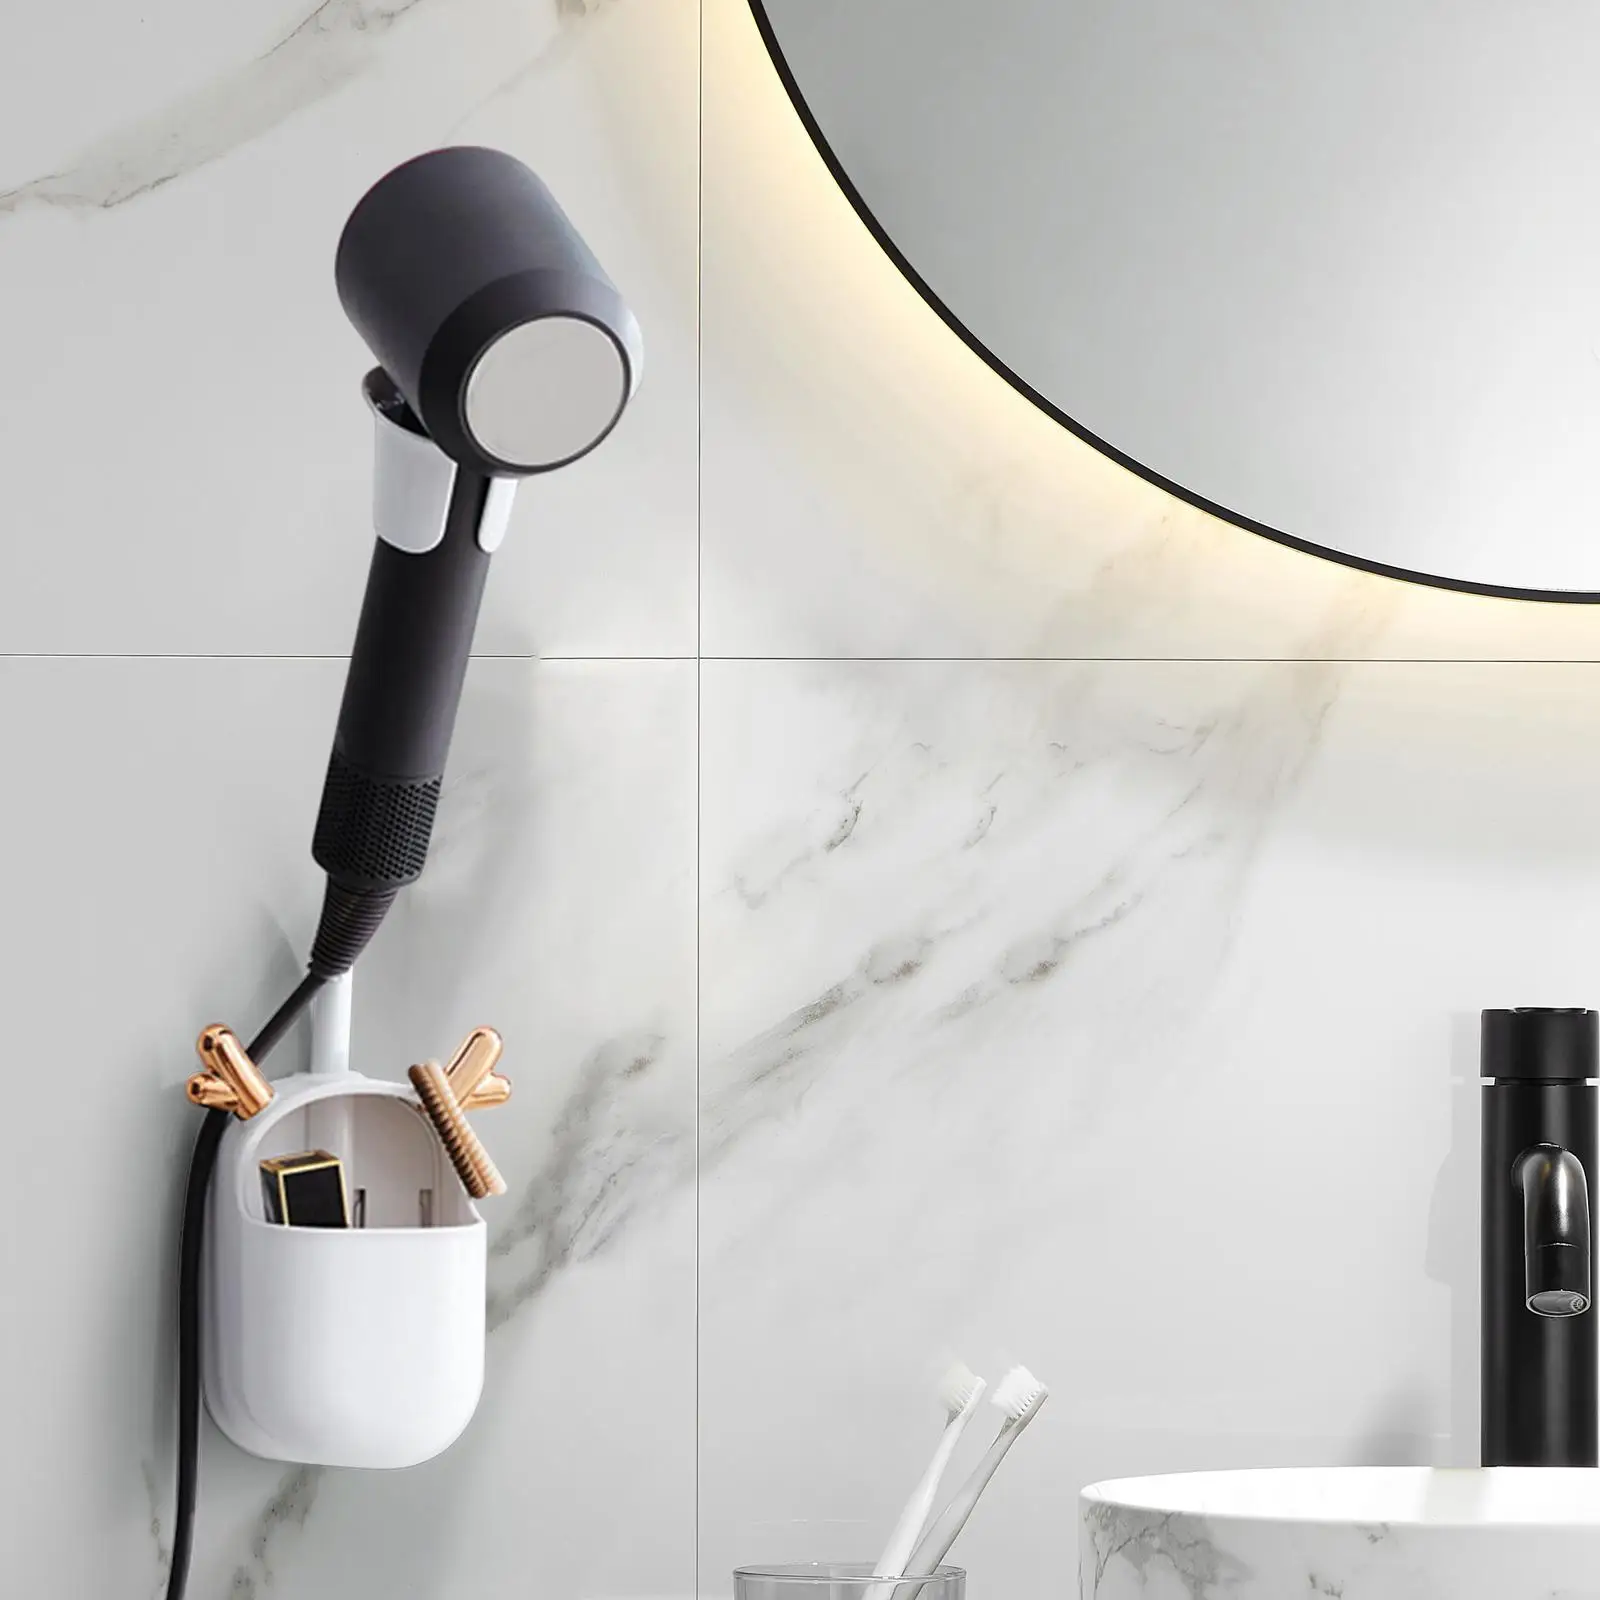 Wall Mounted Hair Dryer Bracket Punch Free Dryer Rack Blow Dryer Holder for Bathroom Toilet Home Decorative